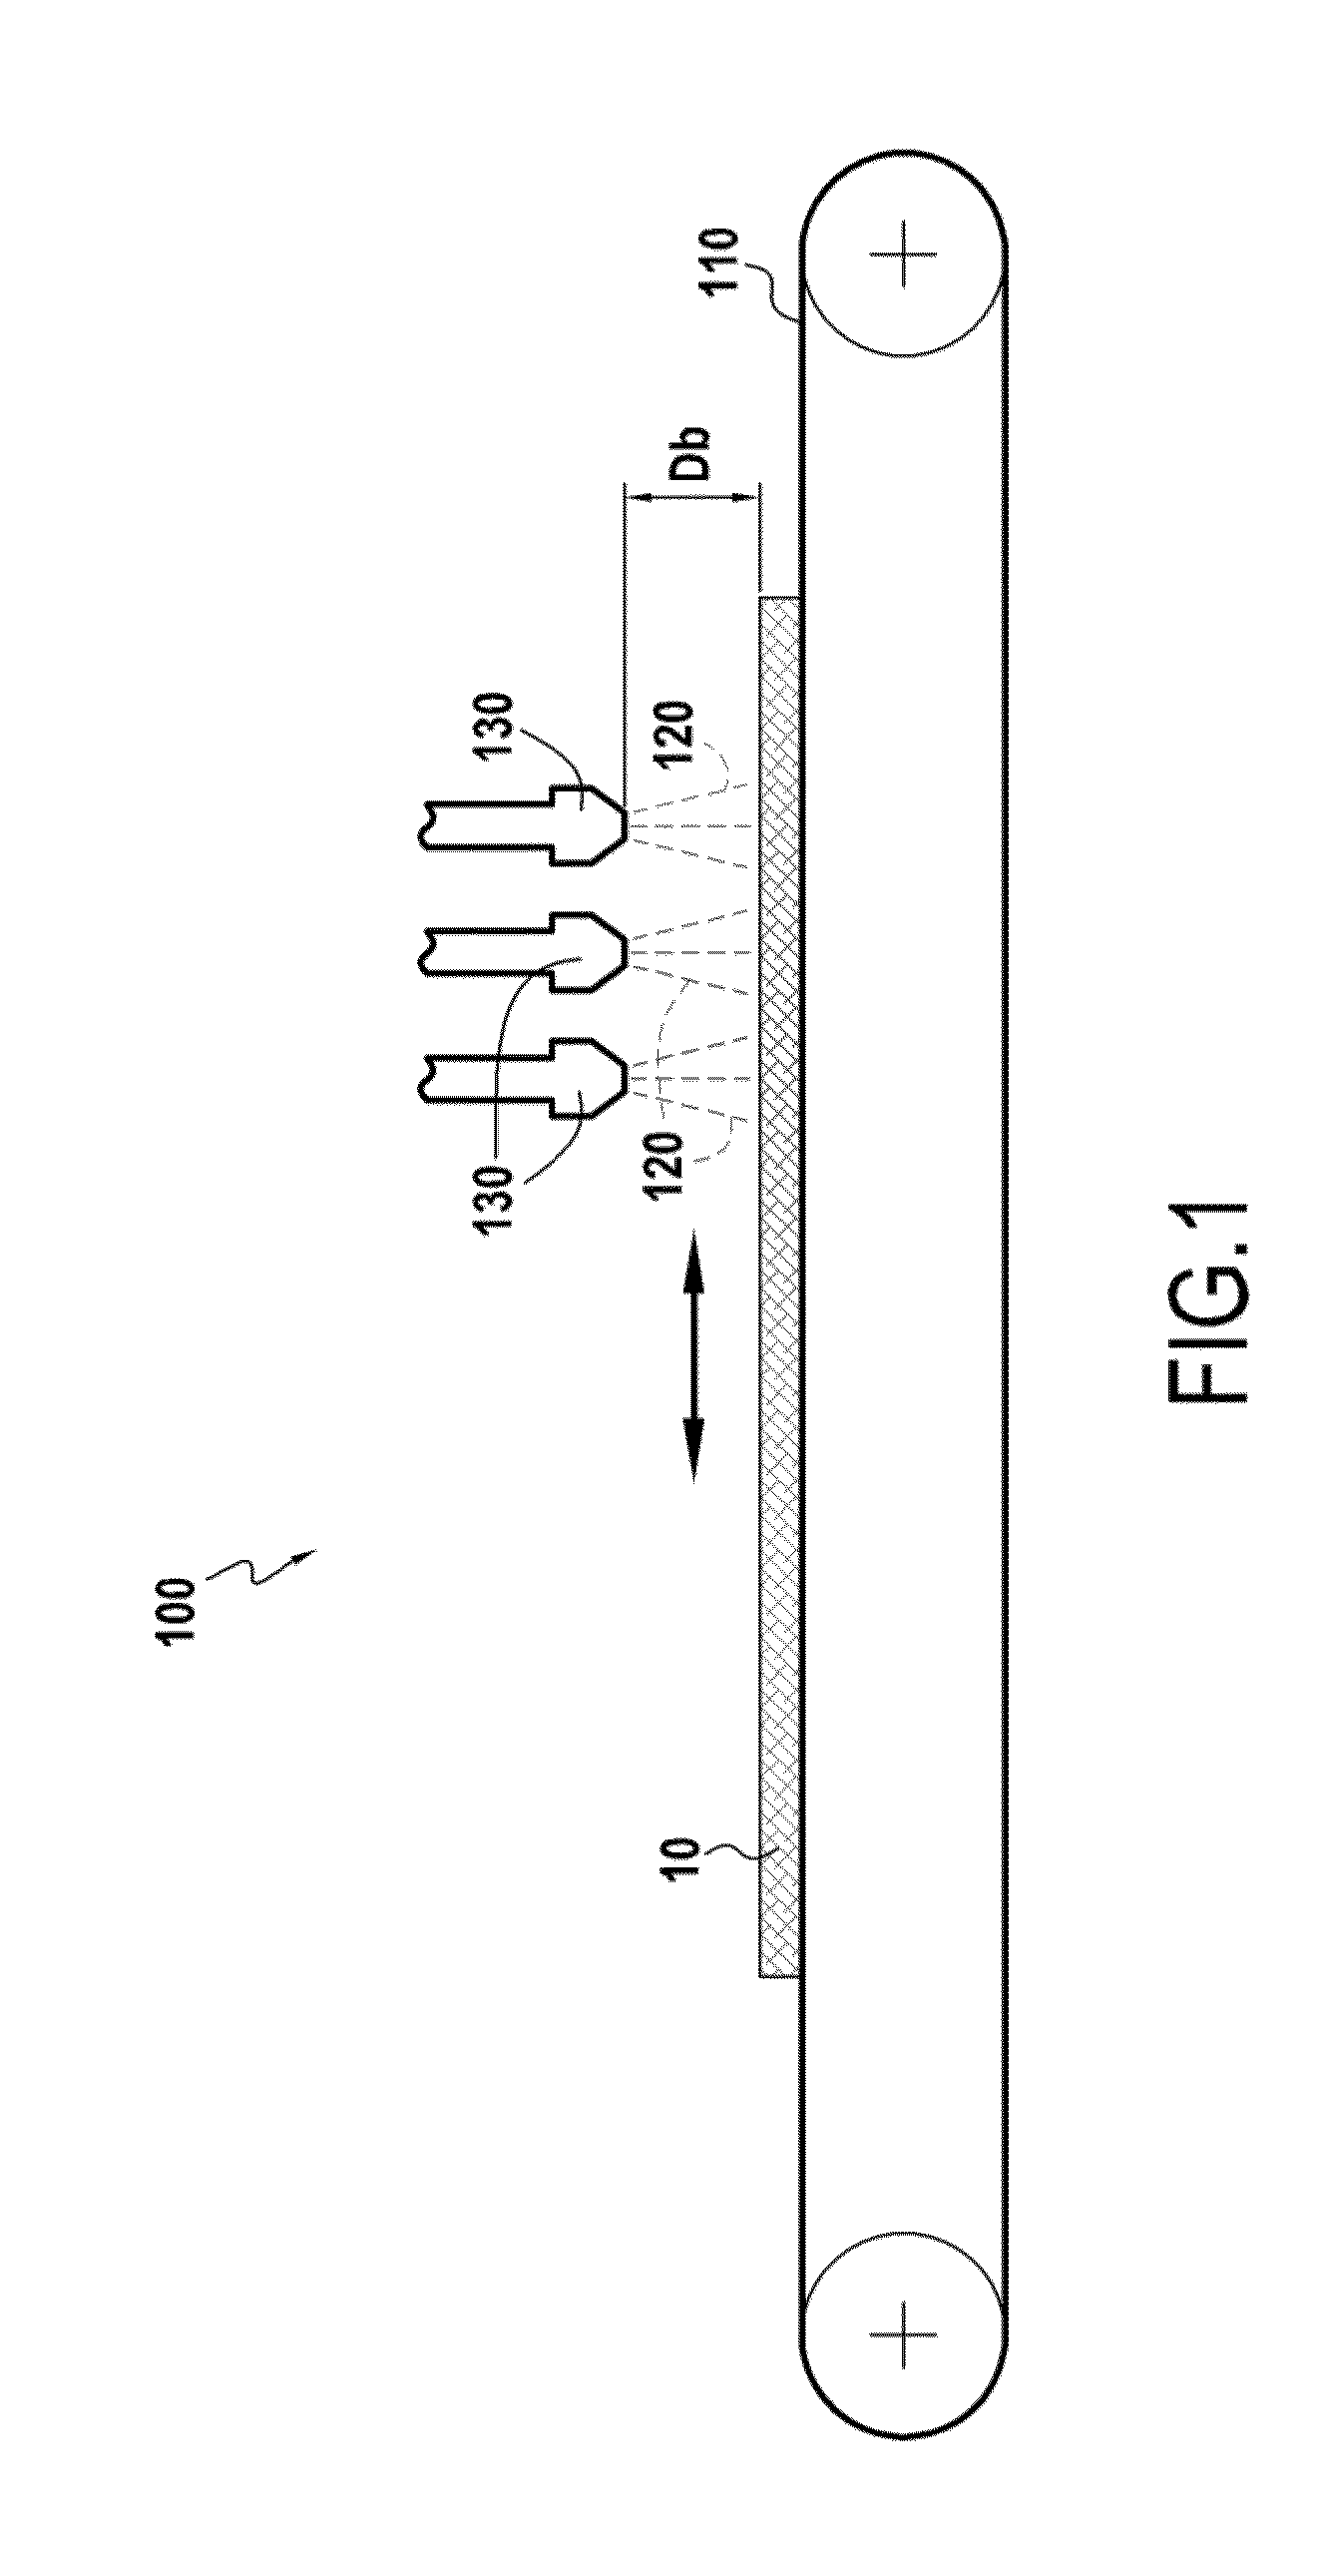 Method of fabricating a composite material part with improved intra-yarn densification